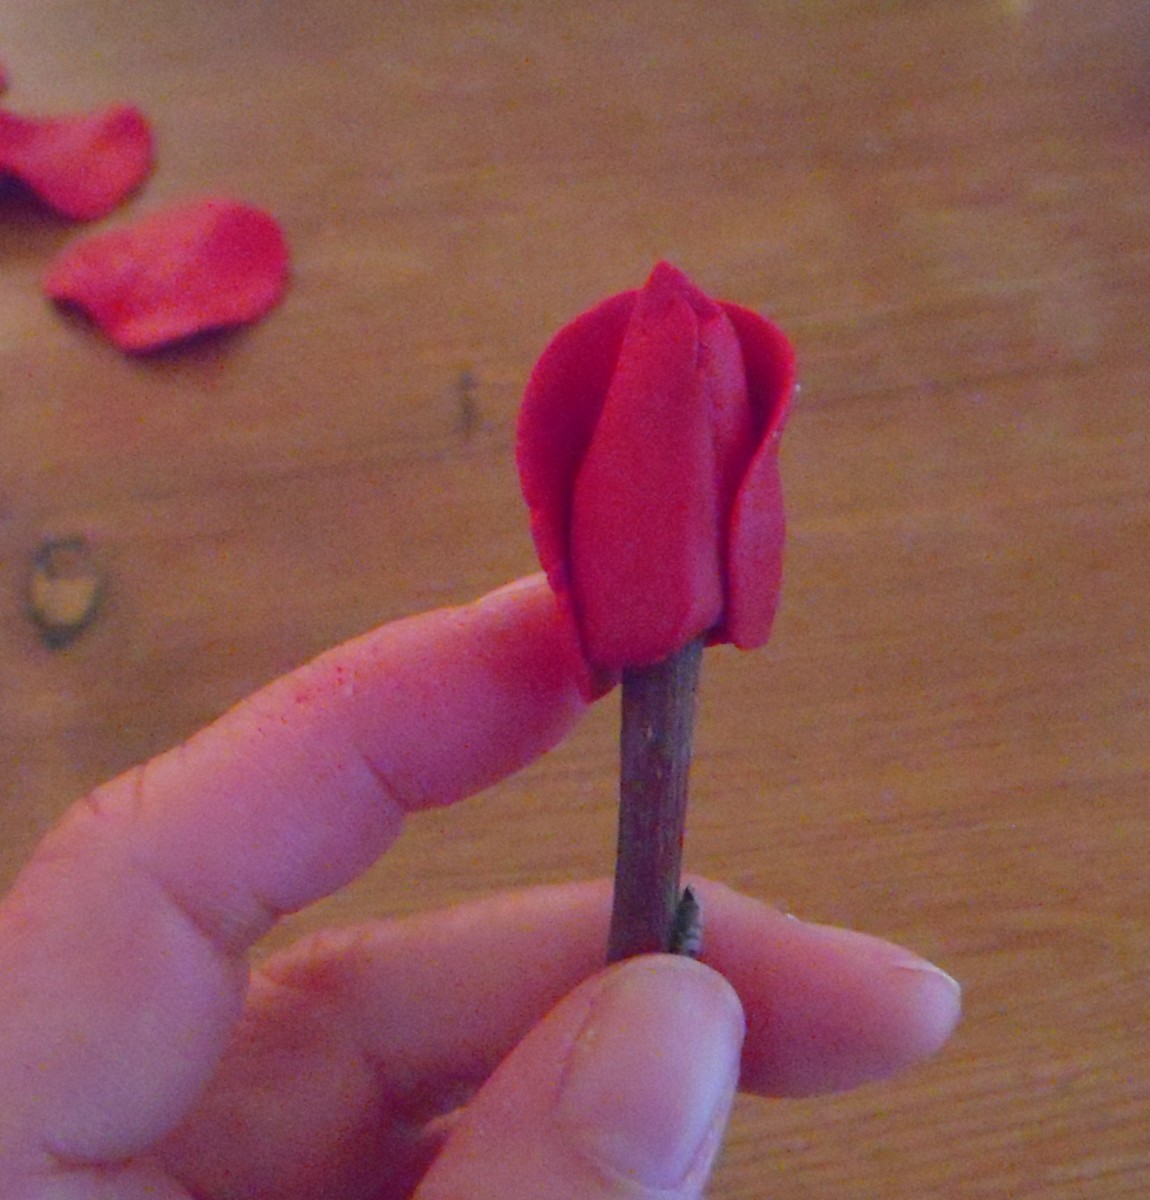 Wrap first petal around rose hip. Leave top unattached, but press petal to base securely.